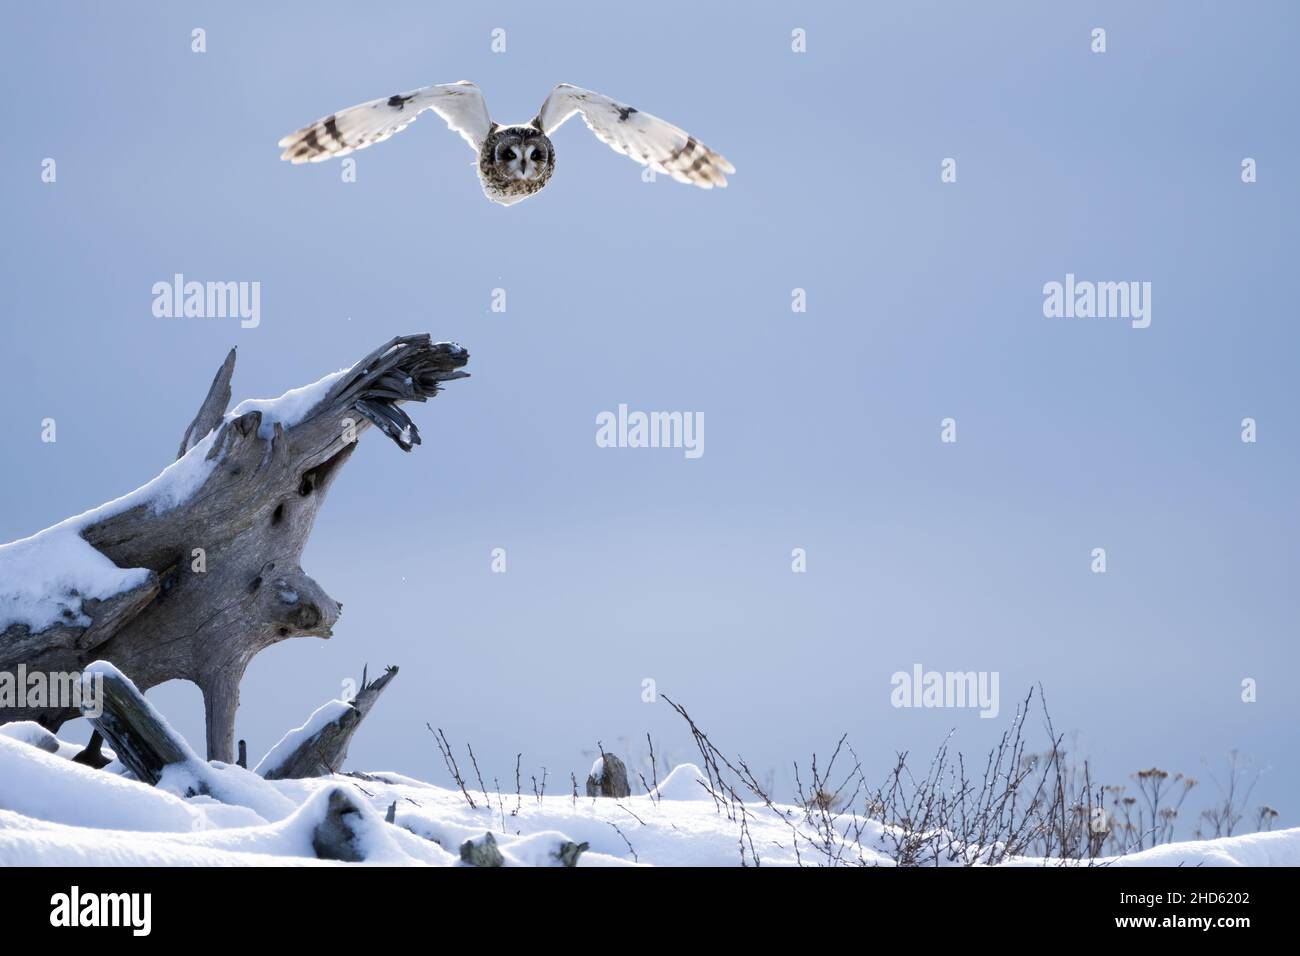 Short-eared owl (Asio flammeus) flying over driftwood covered in snow, Fort Casey State Park, Coupeville, Whidbey Island, Washington, USA Stock Photo